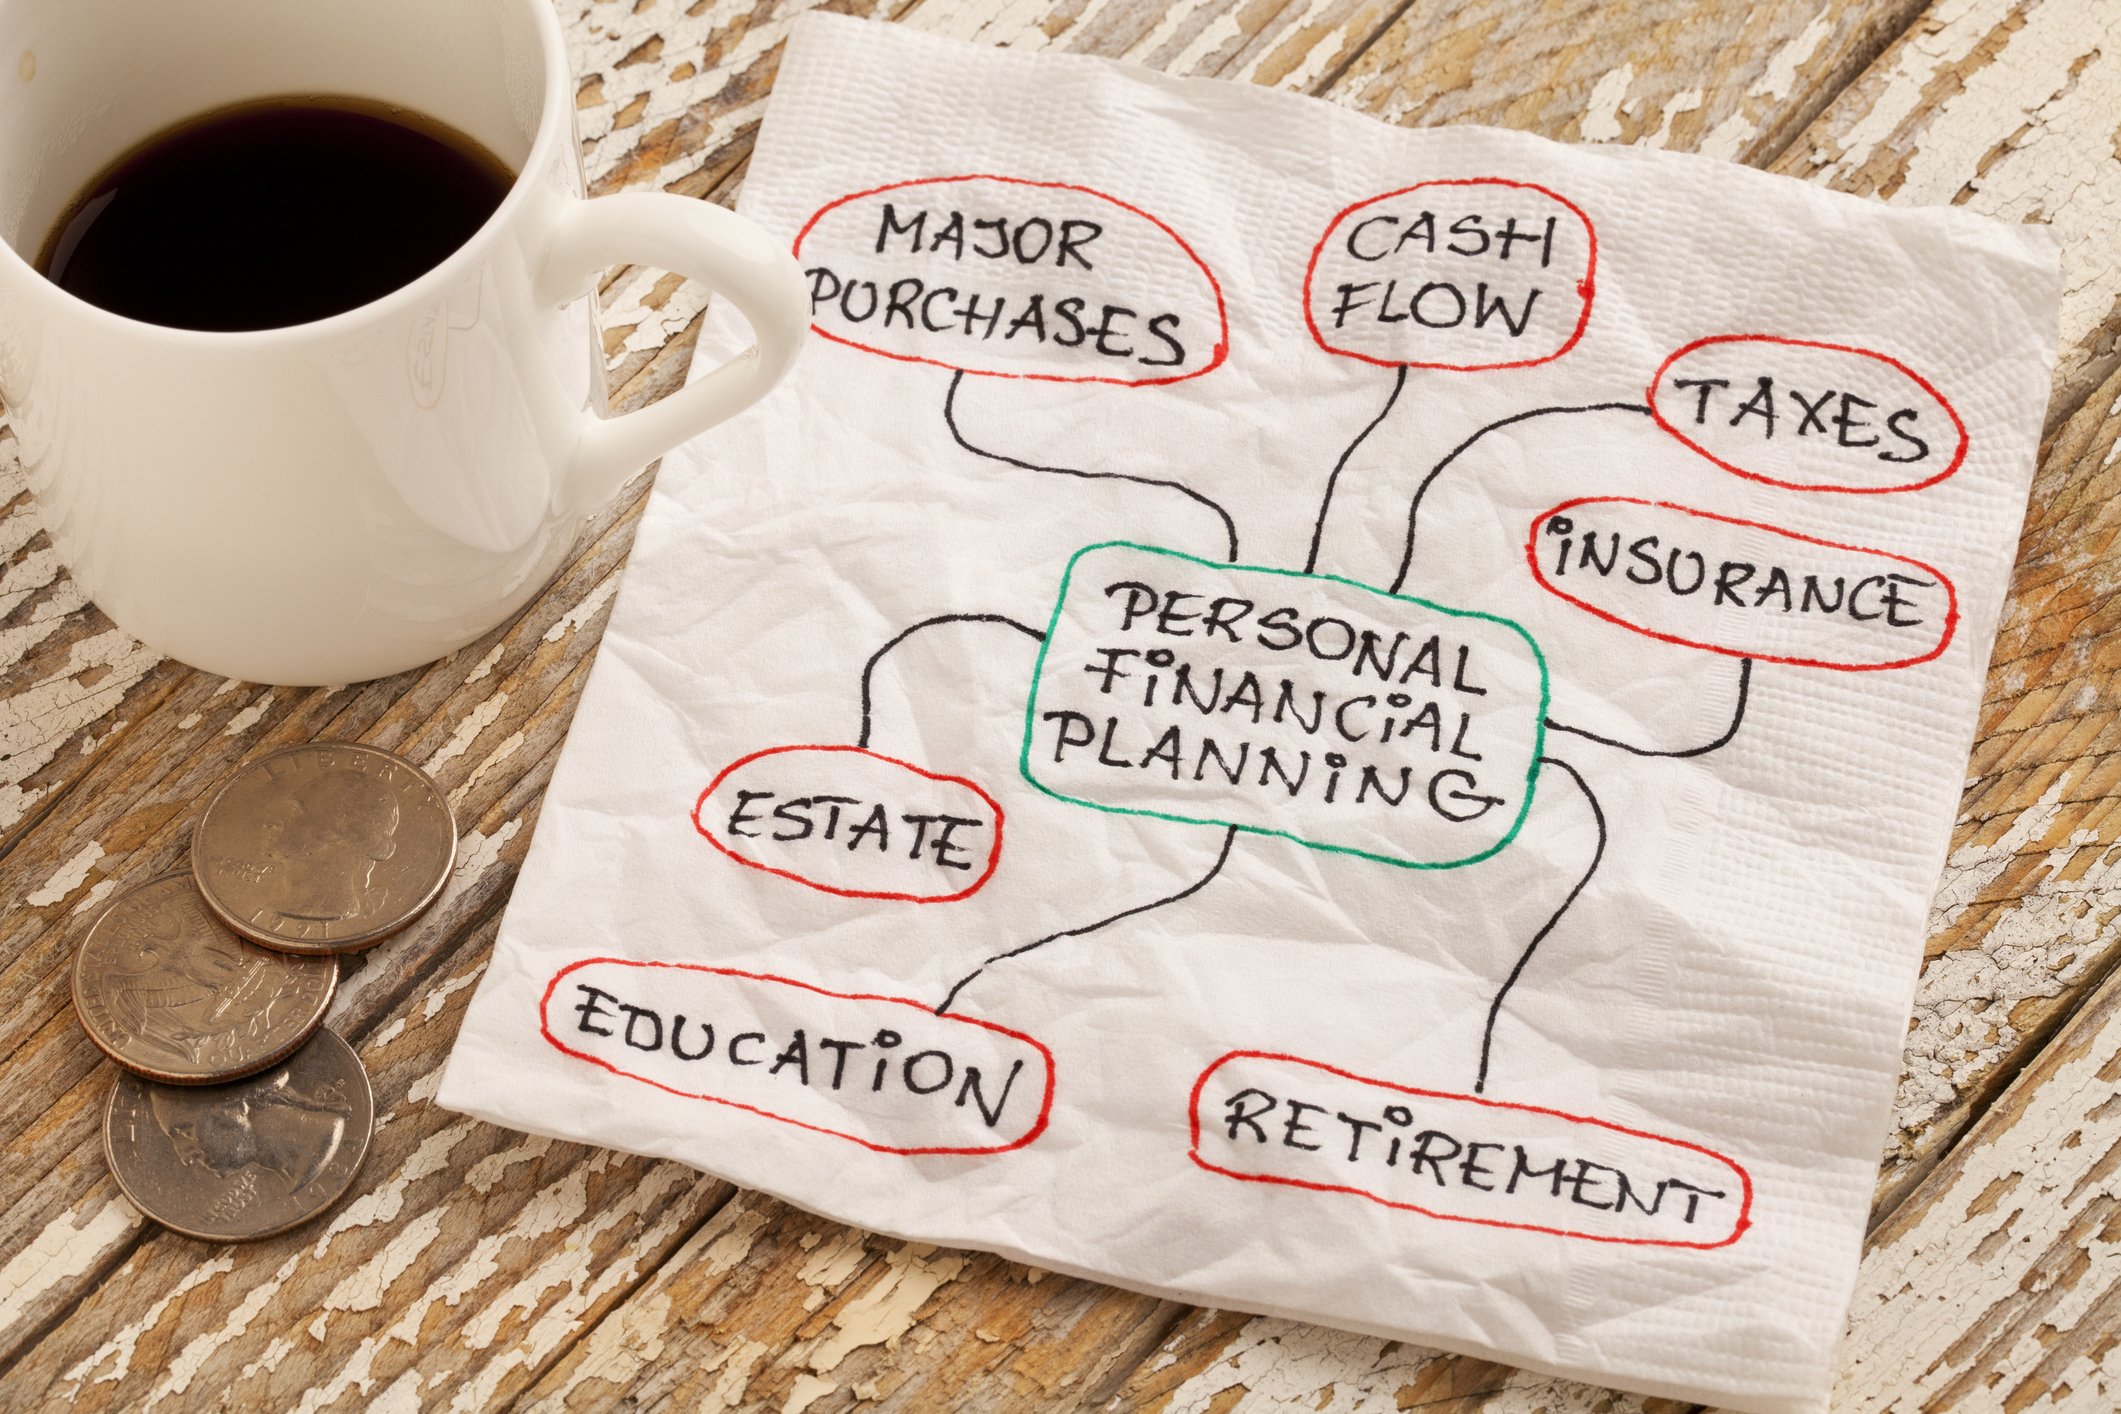 Ongoing personal financial planning